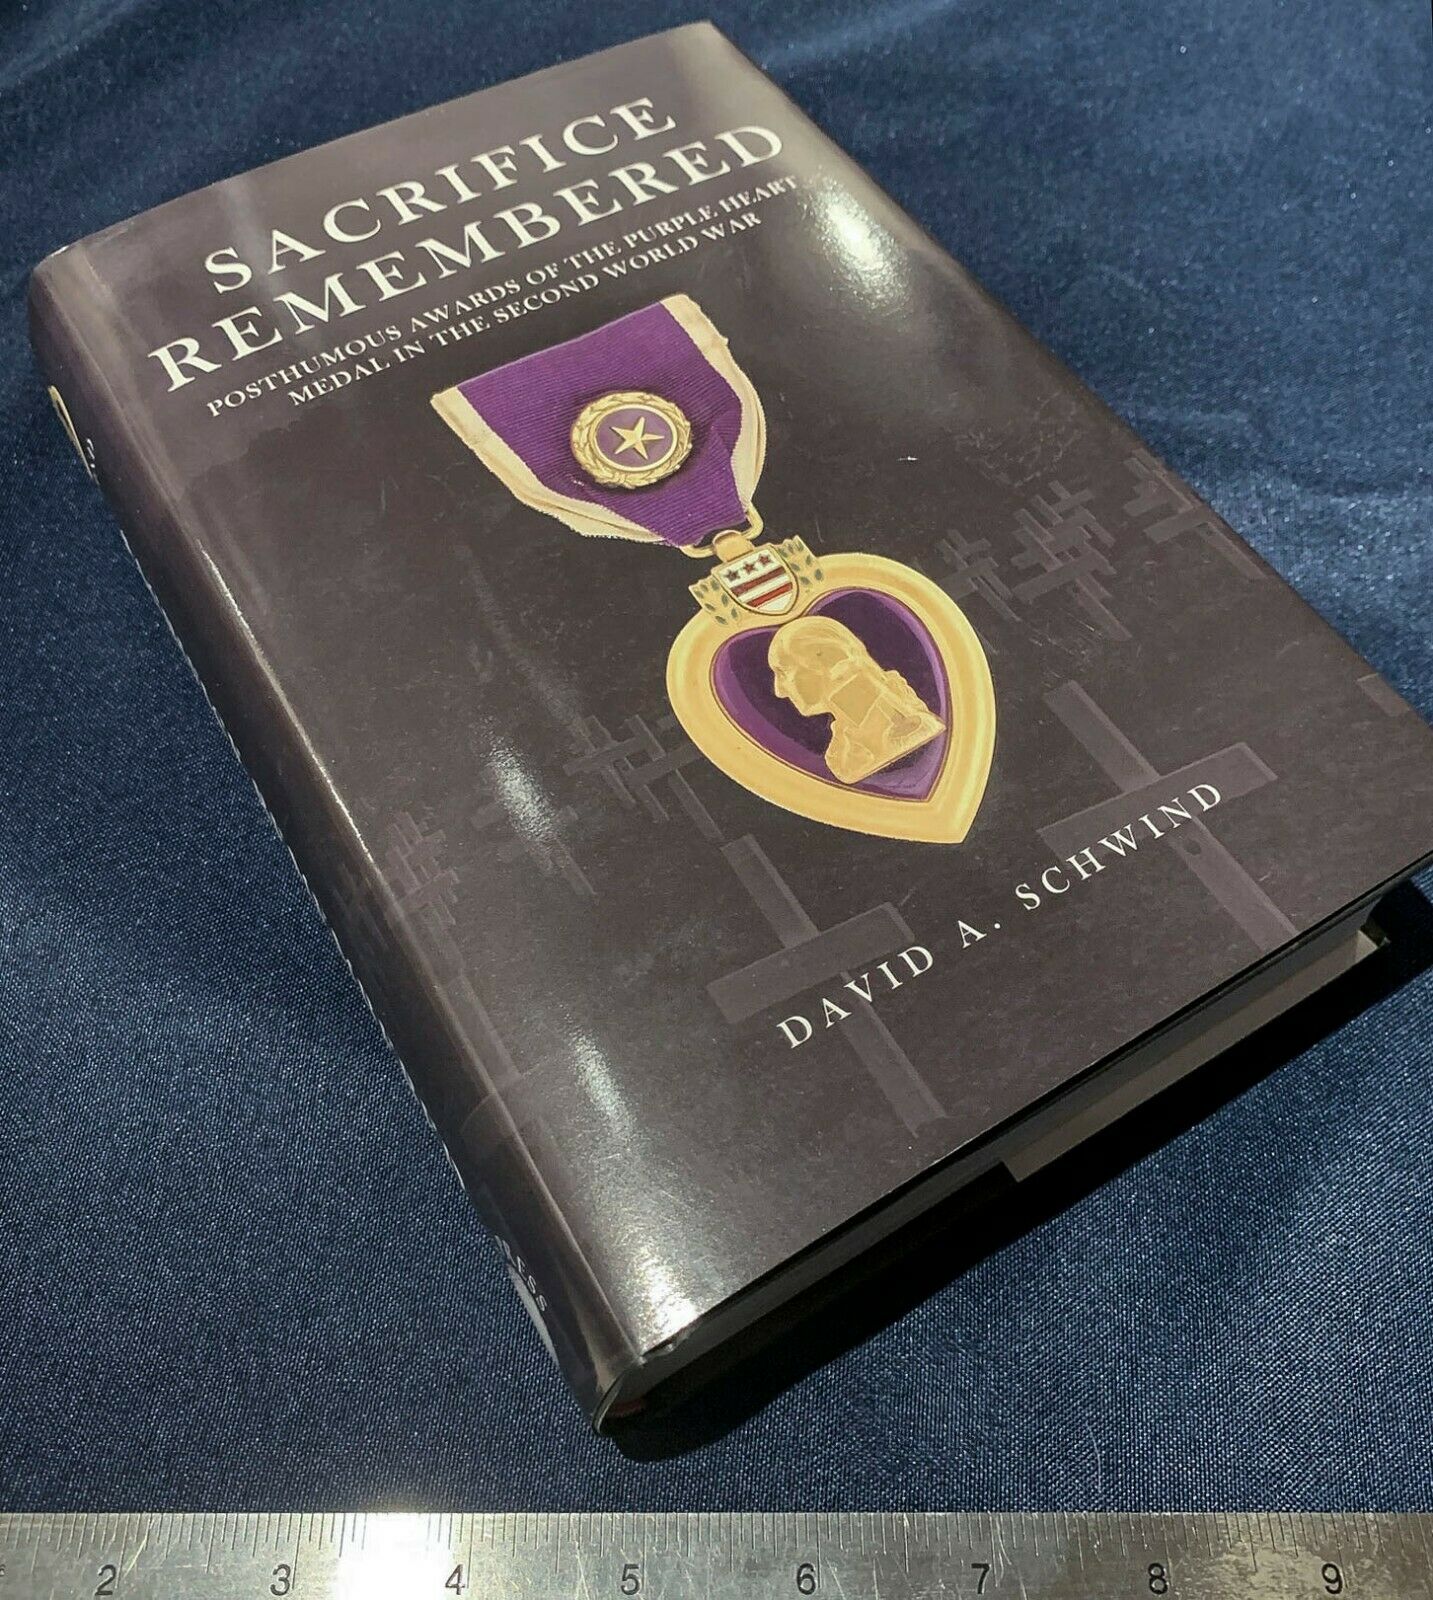 WW2 KIA Posthumous Purple Heart Medal Reference Book NEW RELEASE! Photos!